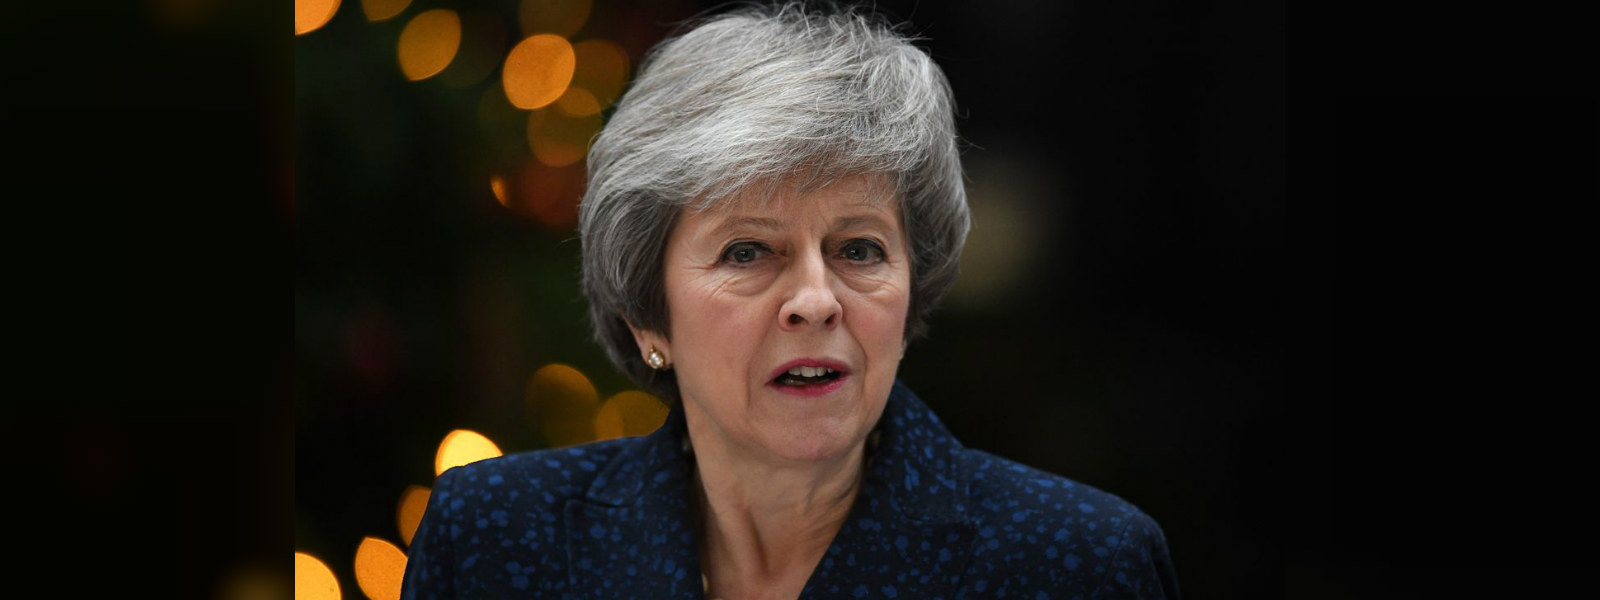 UK PM Theresa May's Brexit deal defeated